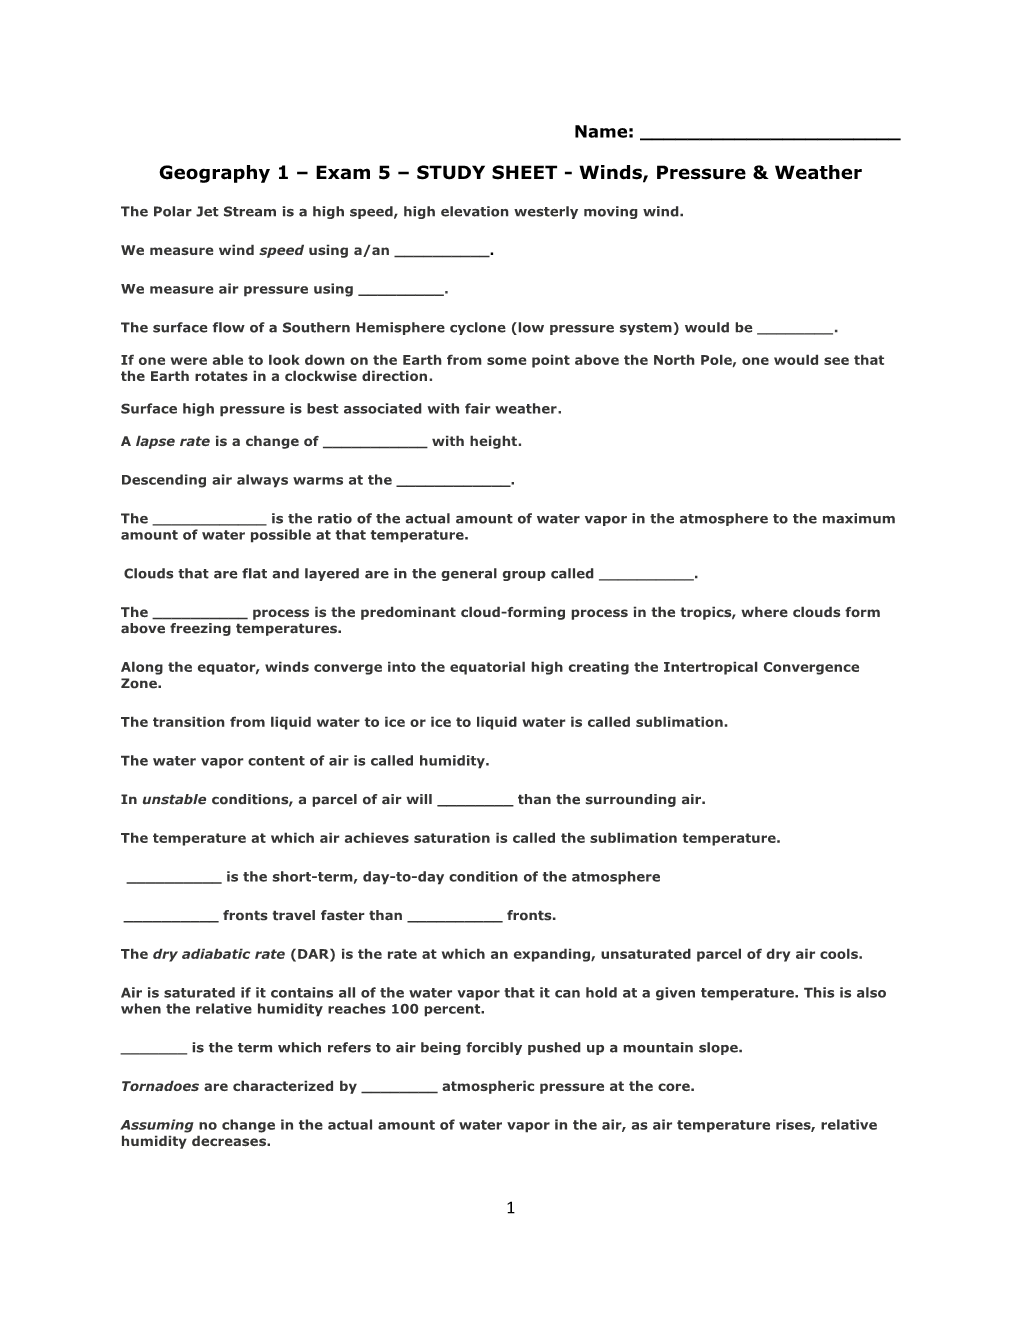 Geography 1 Exam 5 STUDY SHEET - Winds, Pressure & Weather